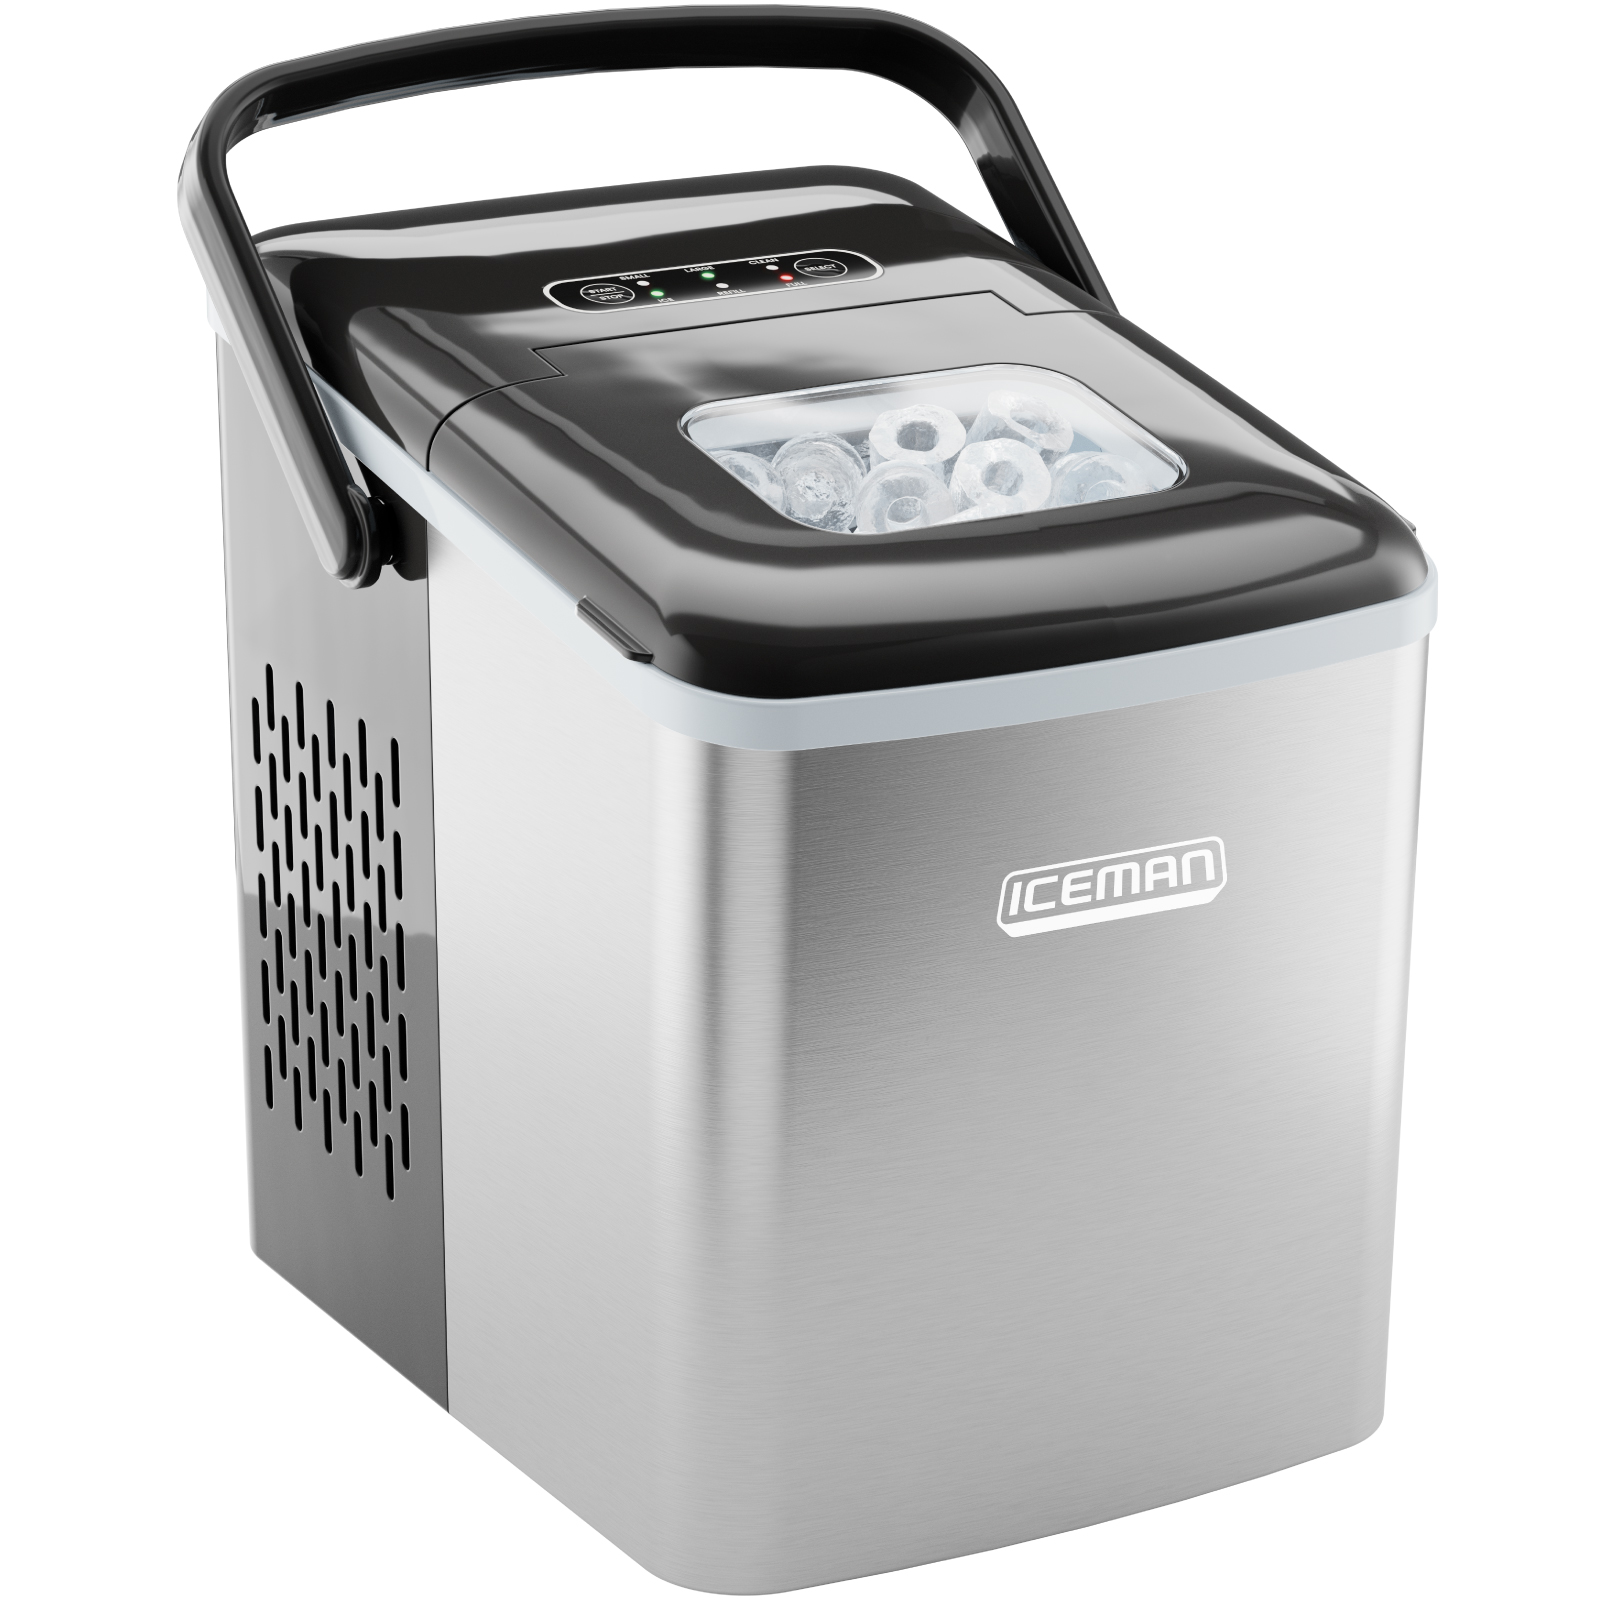 Iceman Dual-Size Countertop Bullet Ice Machine w/ 1.3lb Capacity - Stainless Steel, New - image 1 of 7